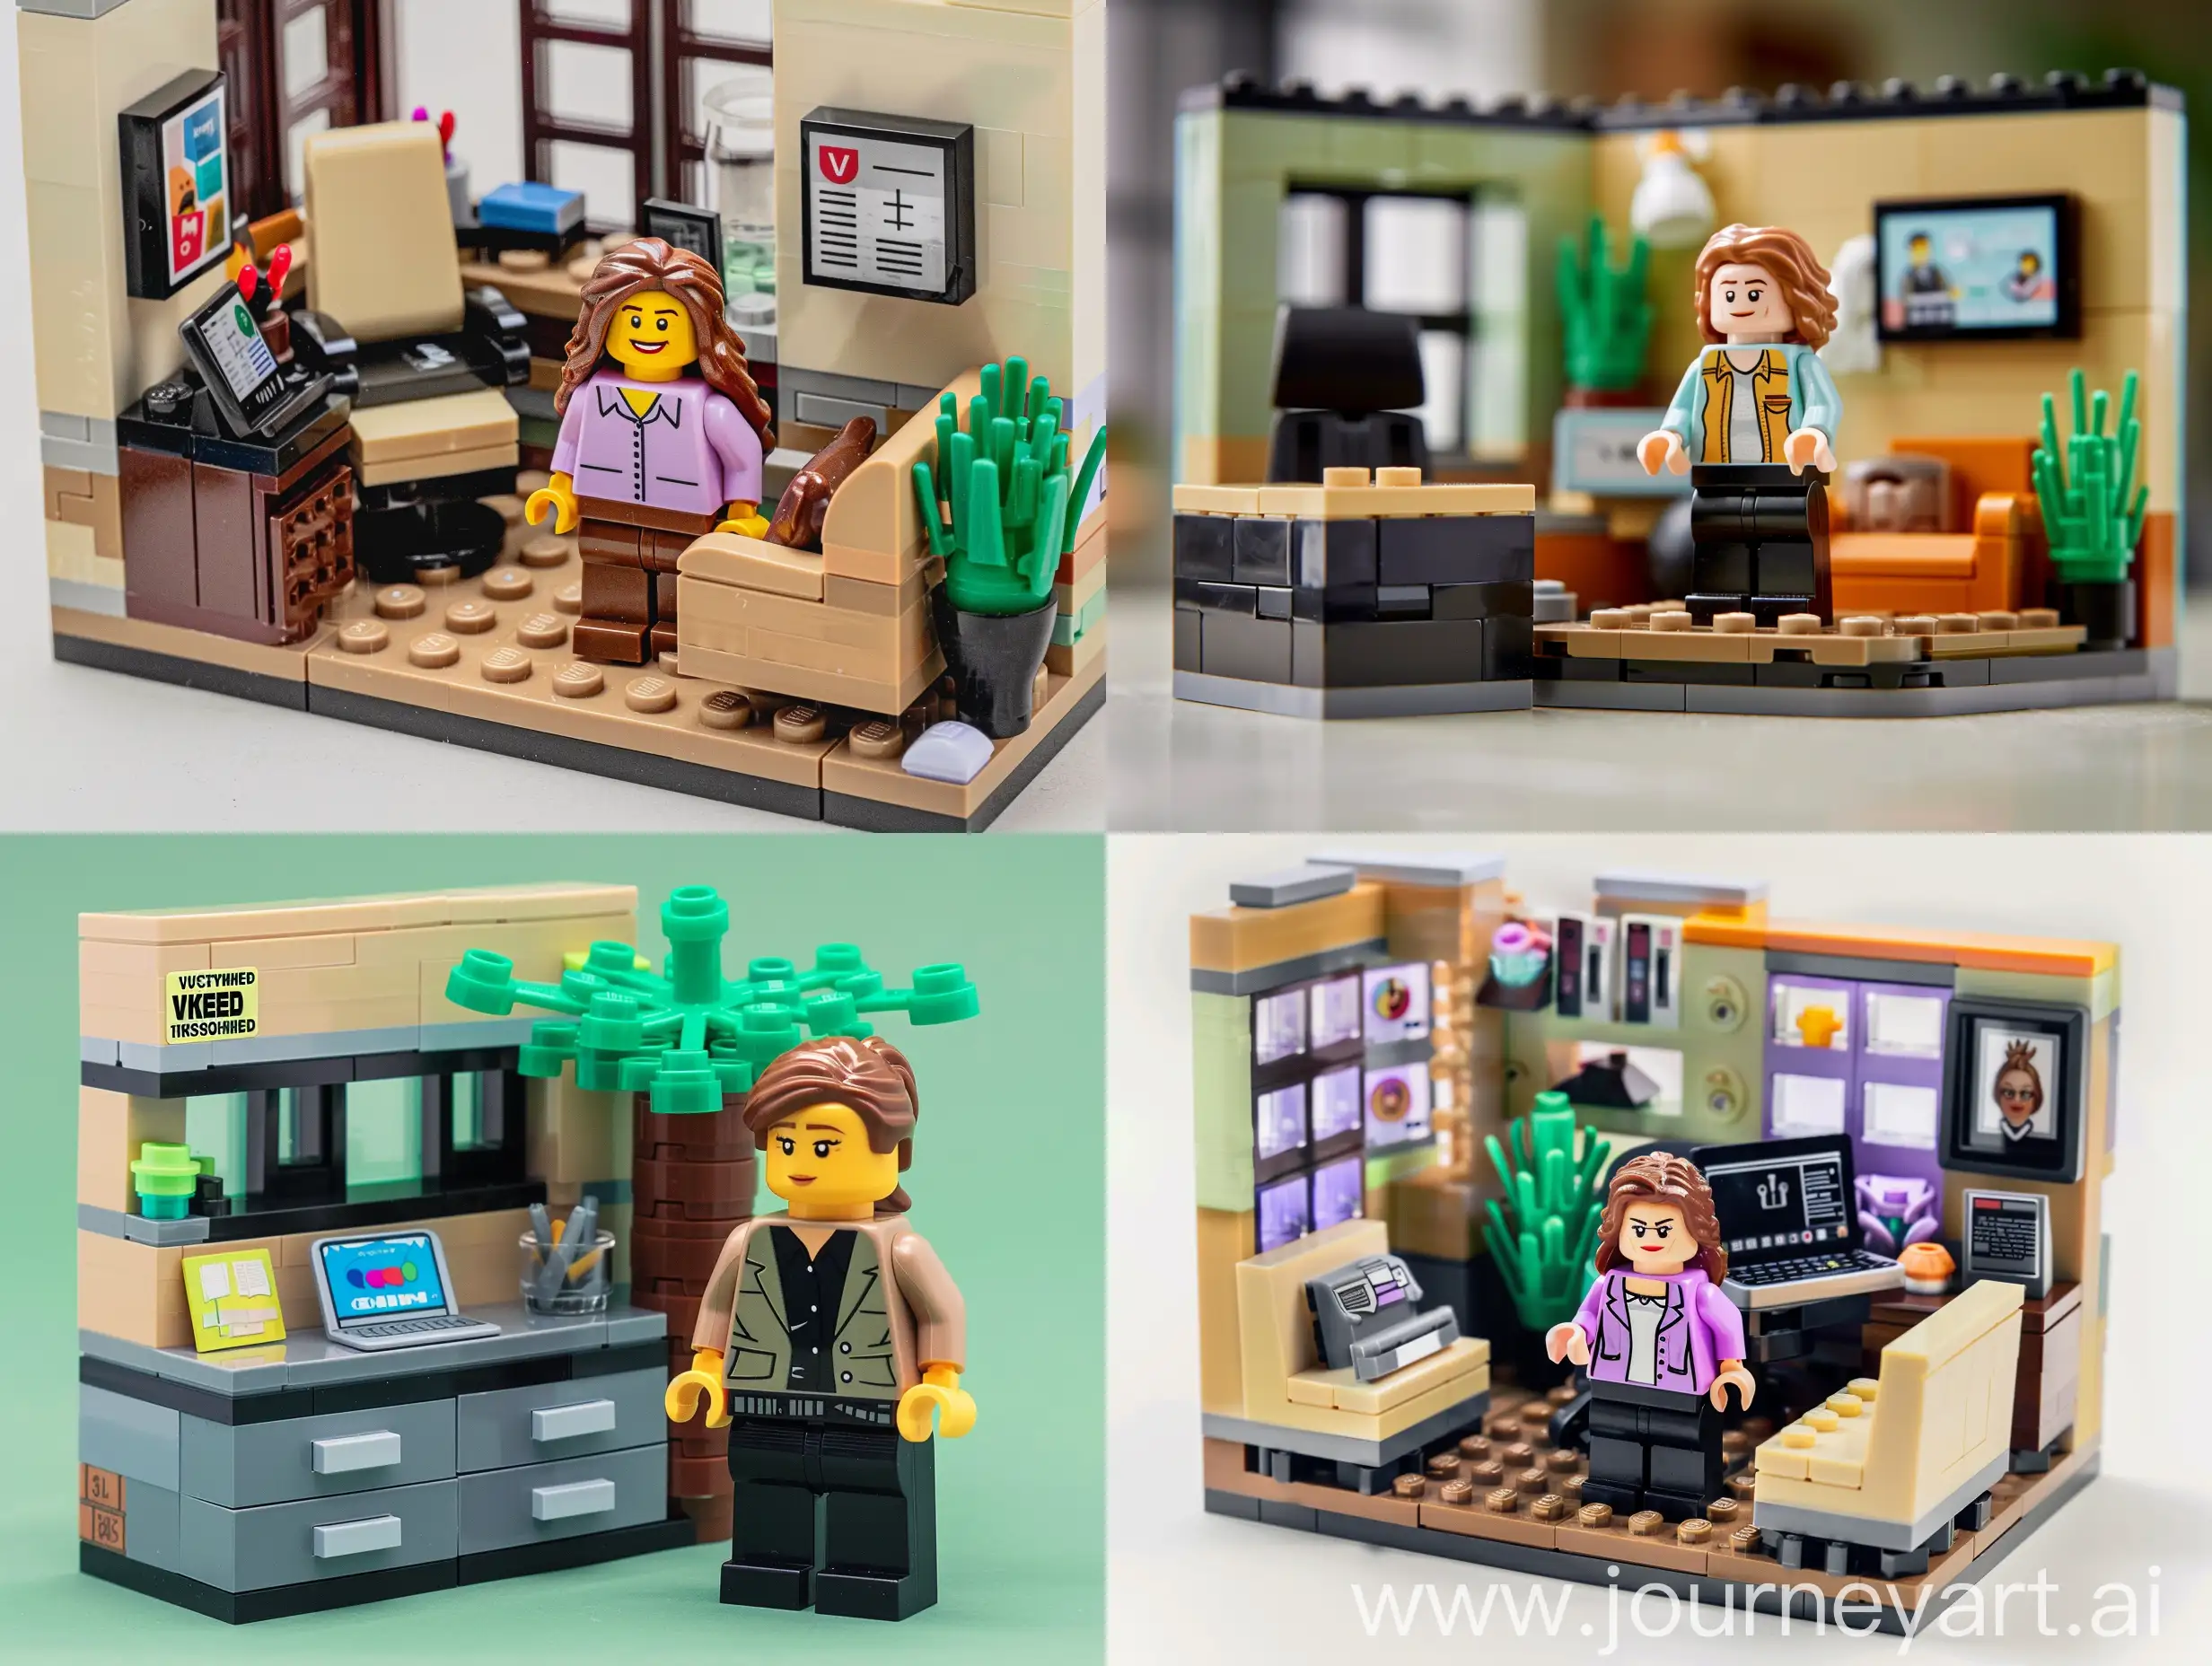 An imaginative LEGO-style box set titled VÆKSTVIRKSOMHED, designed for business professionals. The box art should display a vibrant office space. The set includes a LEGO figure of a business woman. 